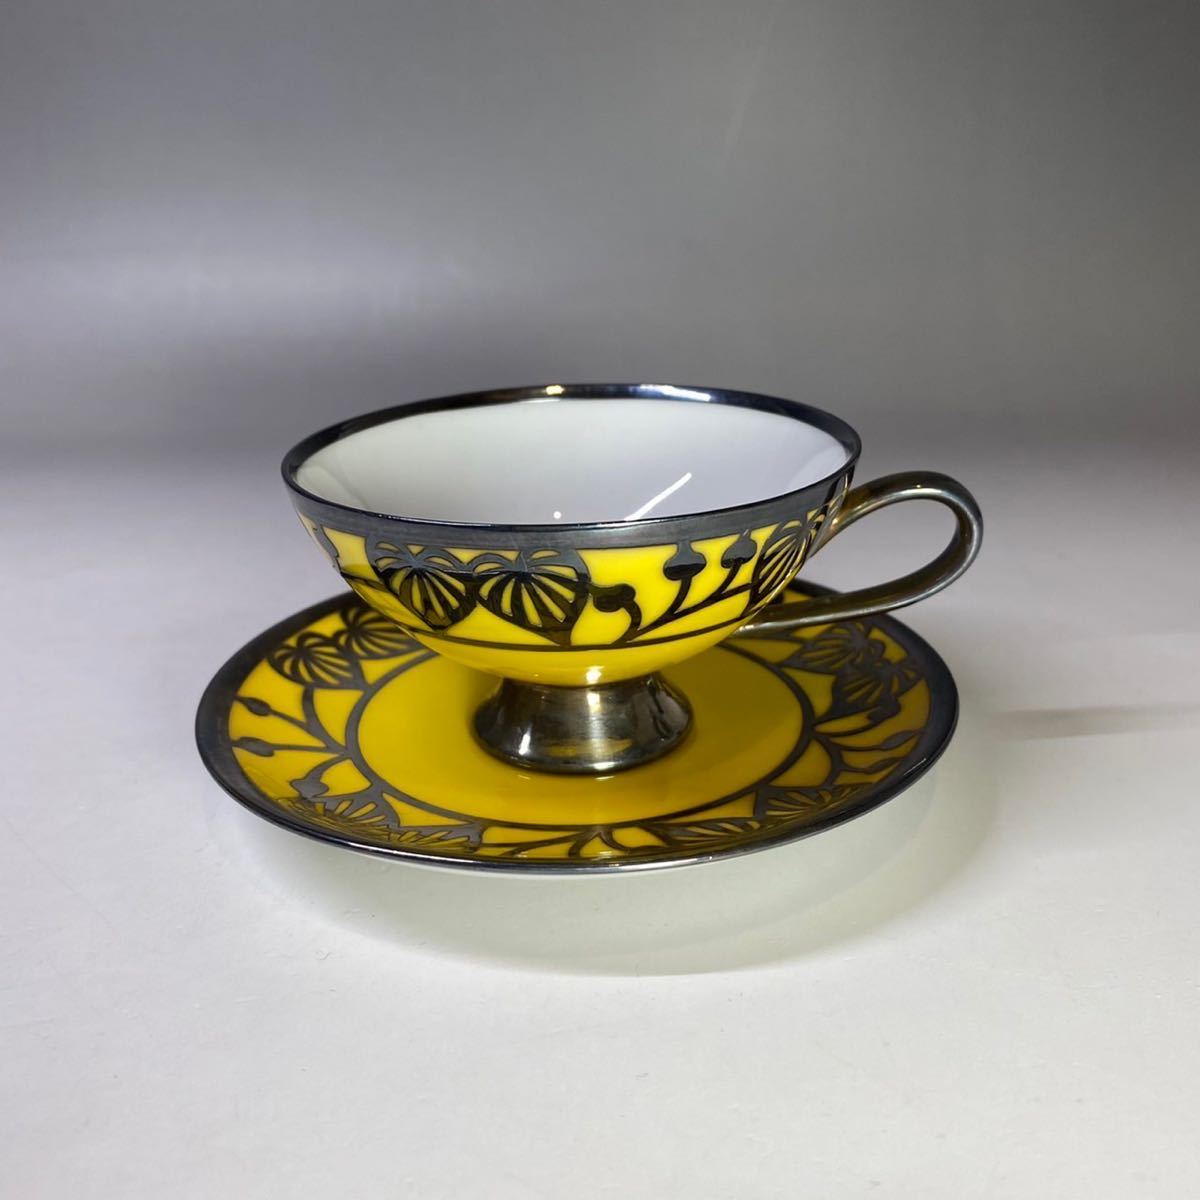 19 century Germany antique Hutschenreuther cup & saucer silver silver a-ru deco tree leaf . small cup yellow silver tableware 